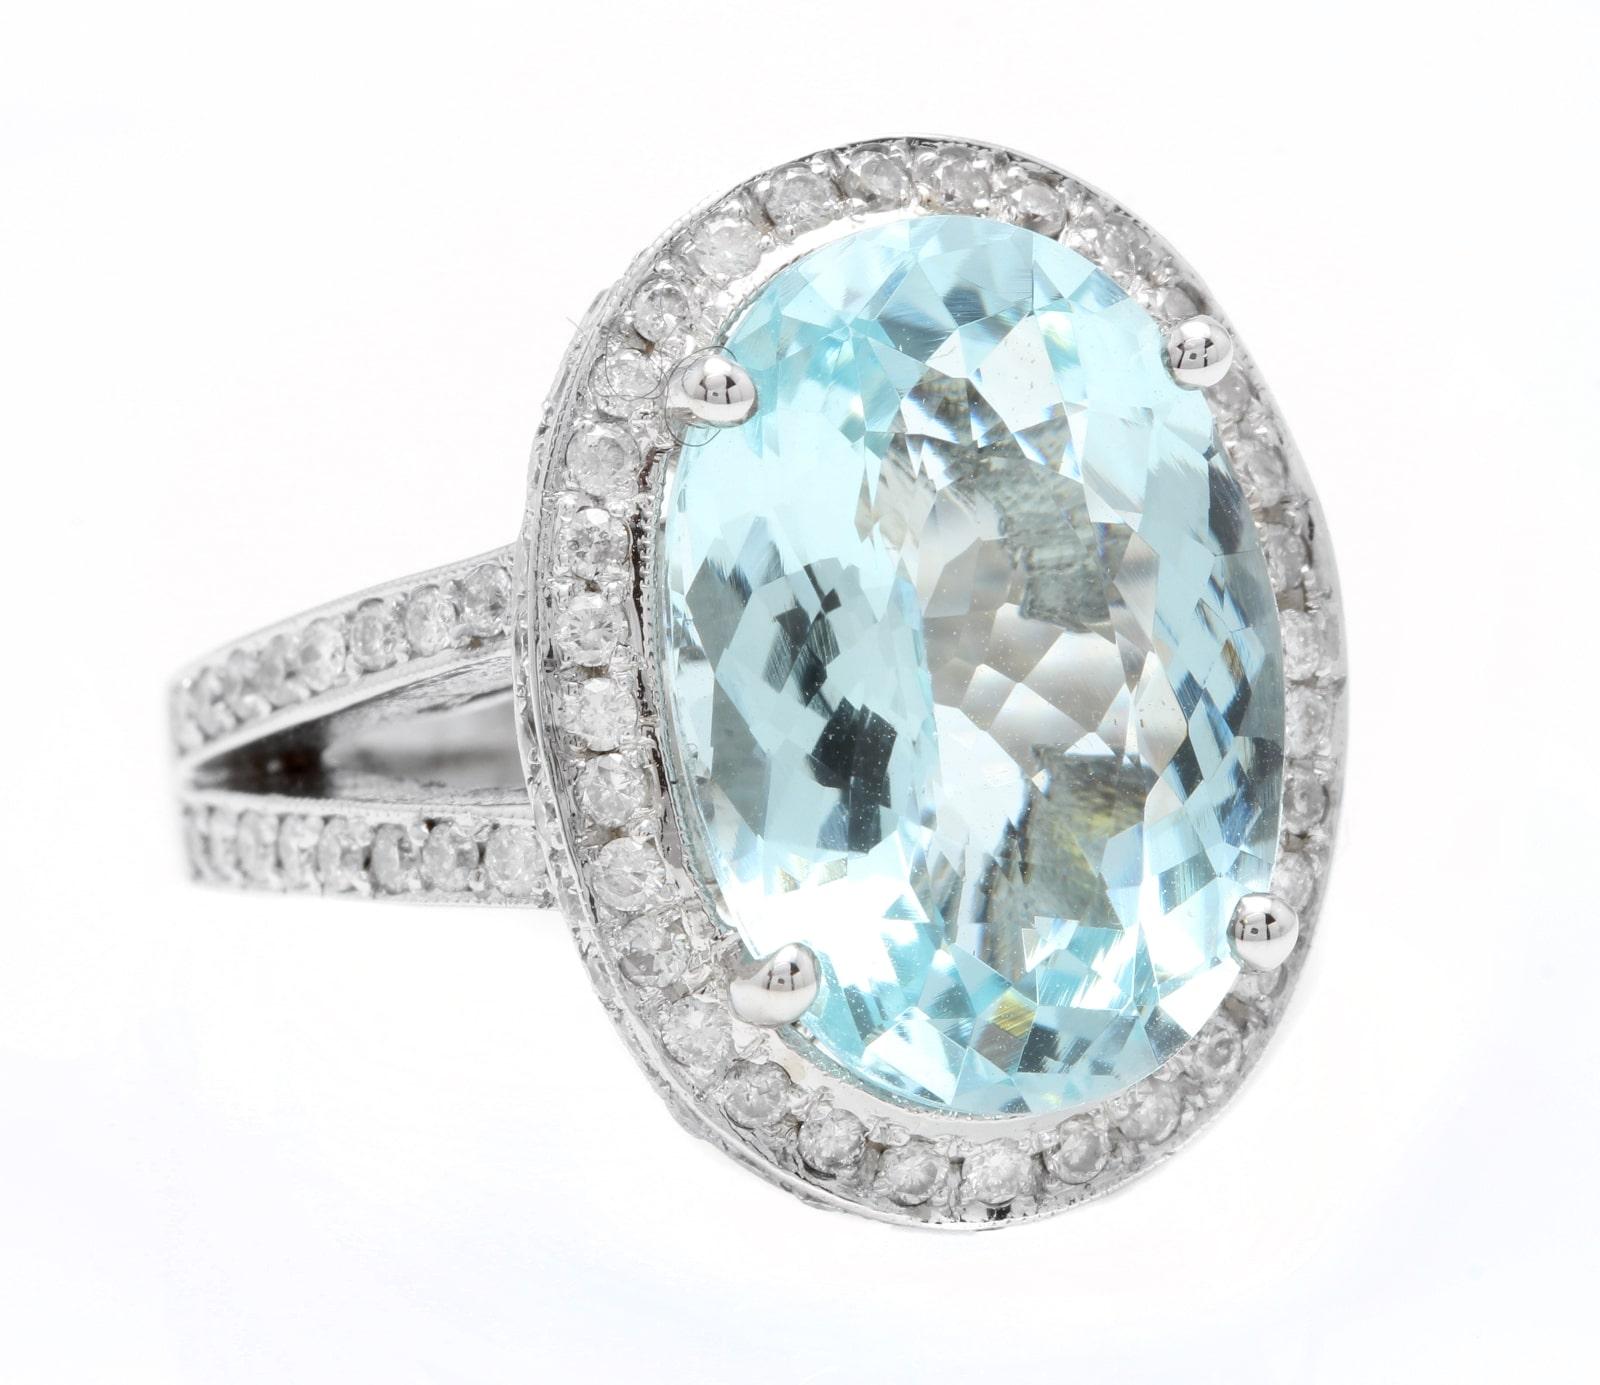 10.20 Carats Natural Impressive Natural Aquamarine and Diamond 14K White Gold Ring

Suggested Replacement Value $8,500.00

Total Natural Aquamarine Weight is: Approx. 9.00 Carats 

Aquamarine Measures: Approx. 17.00 x 12.00mm

Aquamarine Treatment: